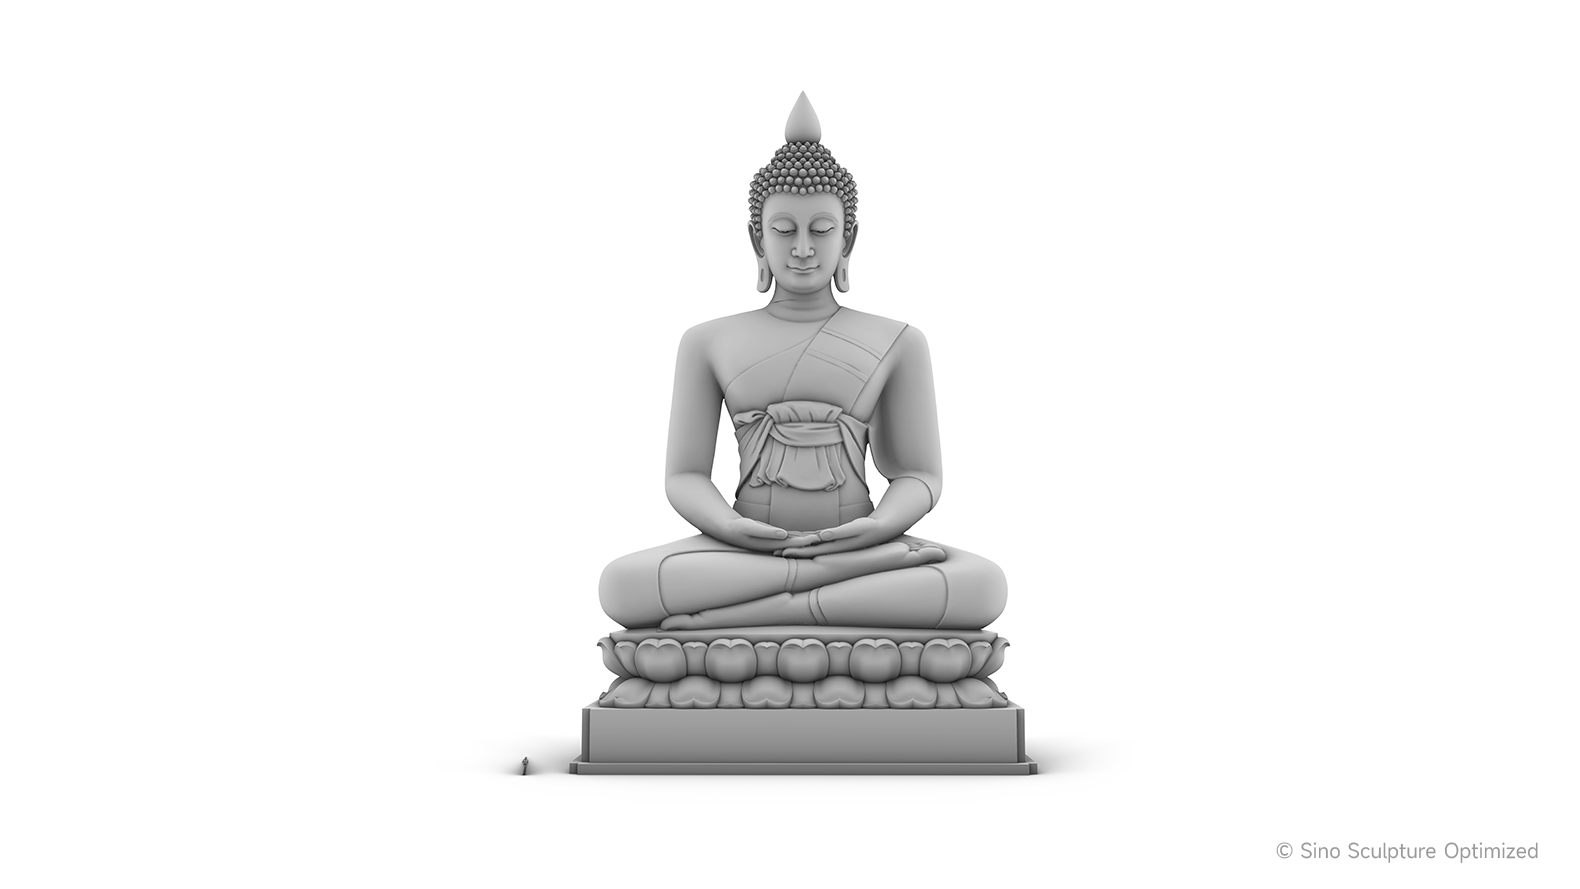 The 3D design of the large bronze Buddha statue